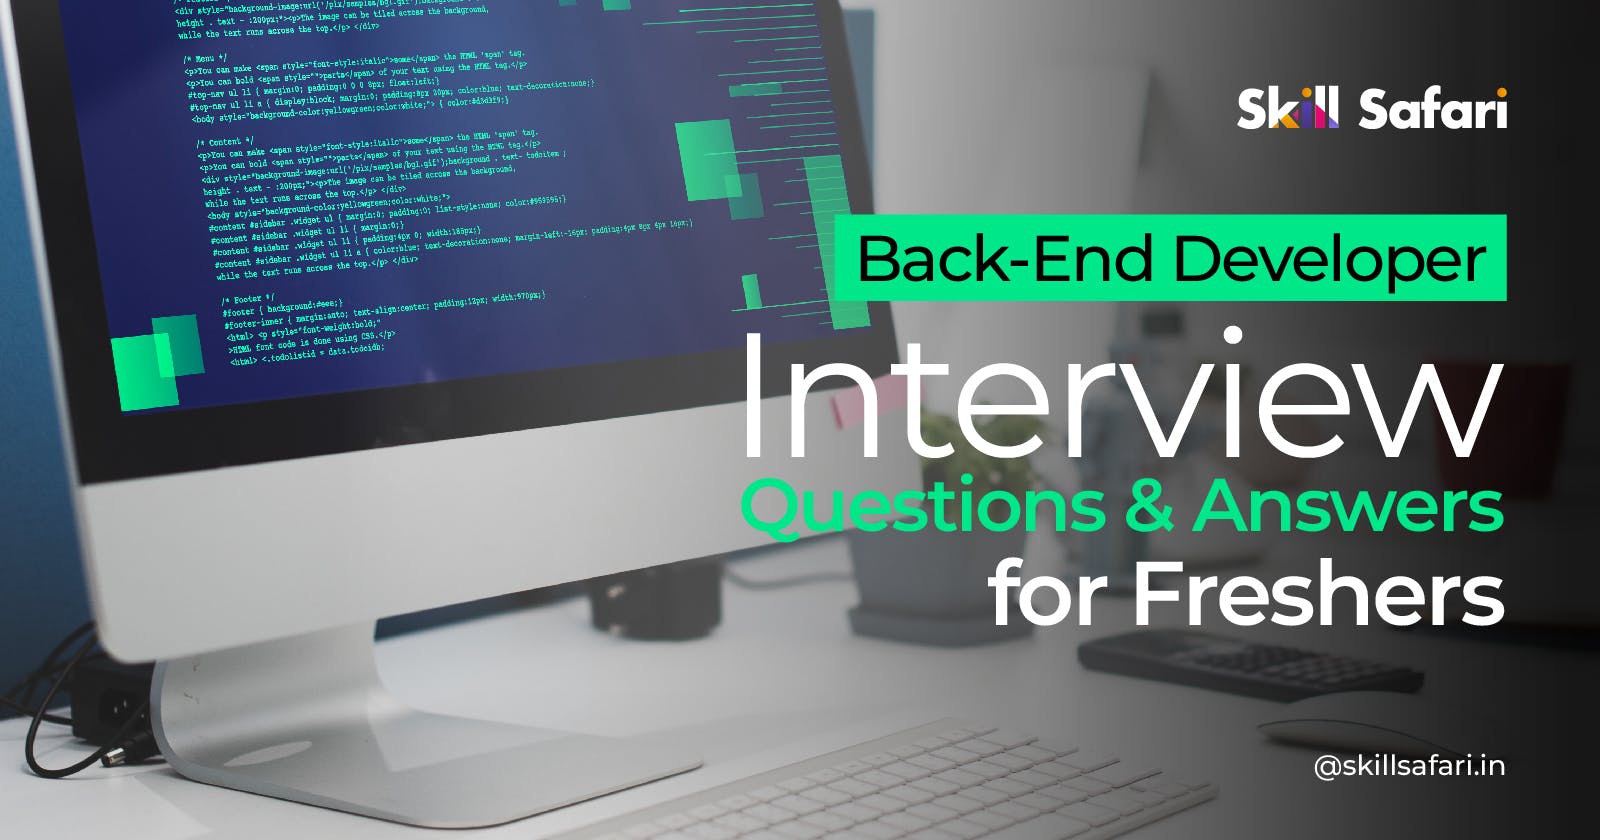 Back-End Developer Interview Questions And Answers For Freshers